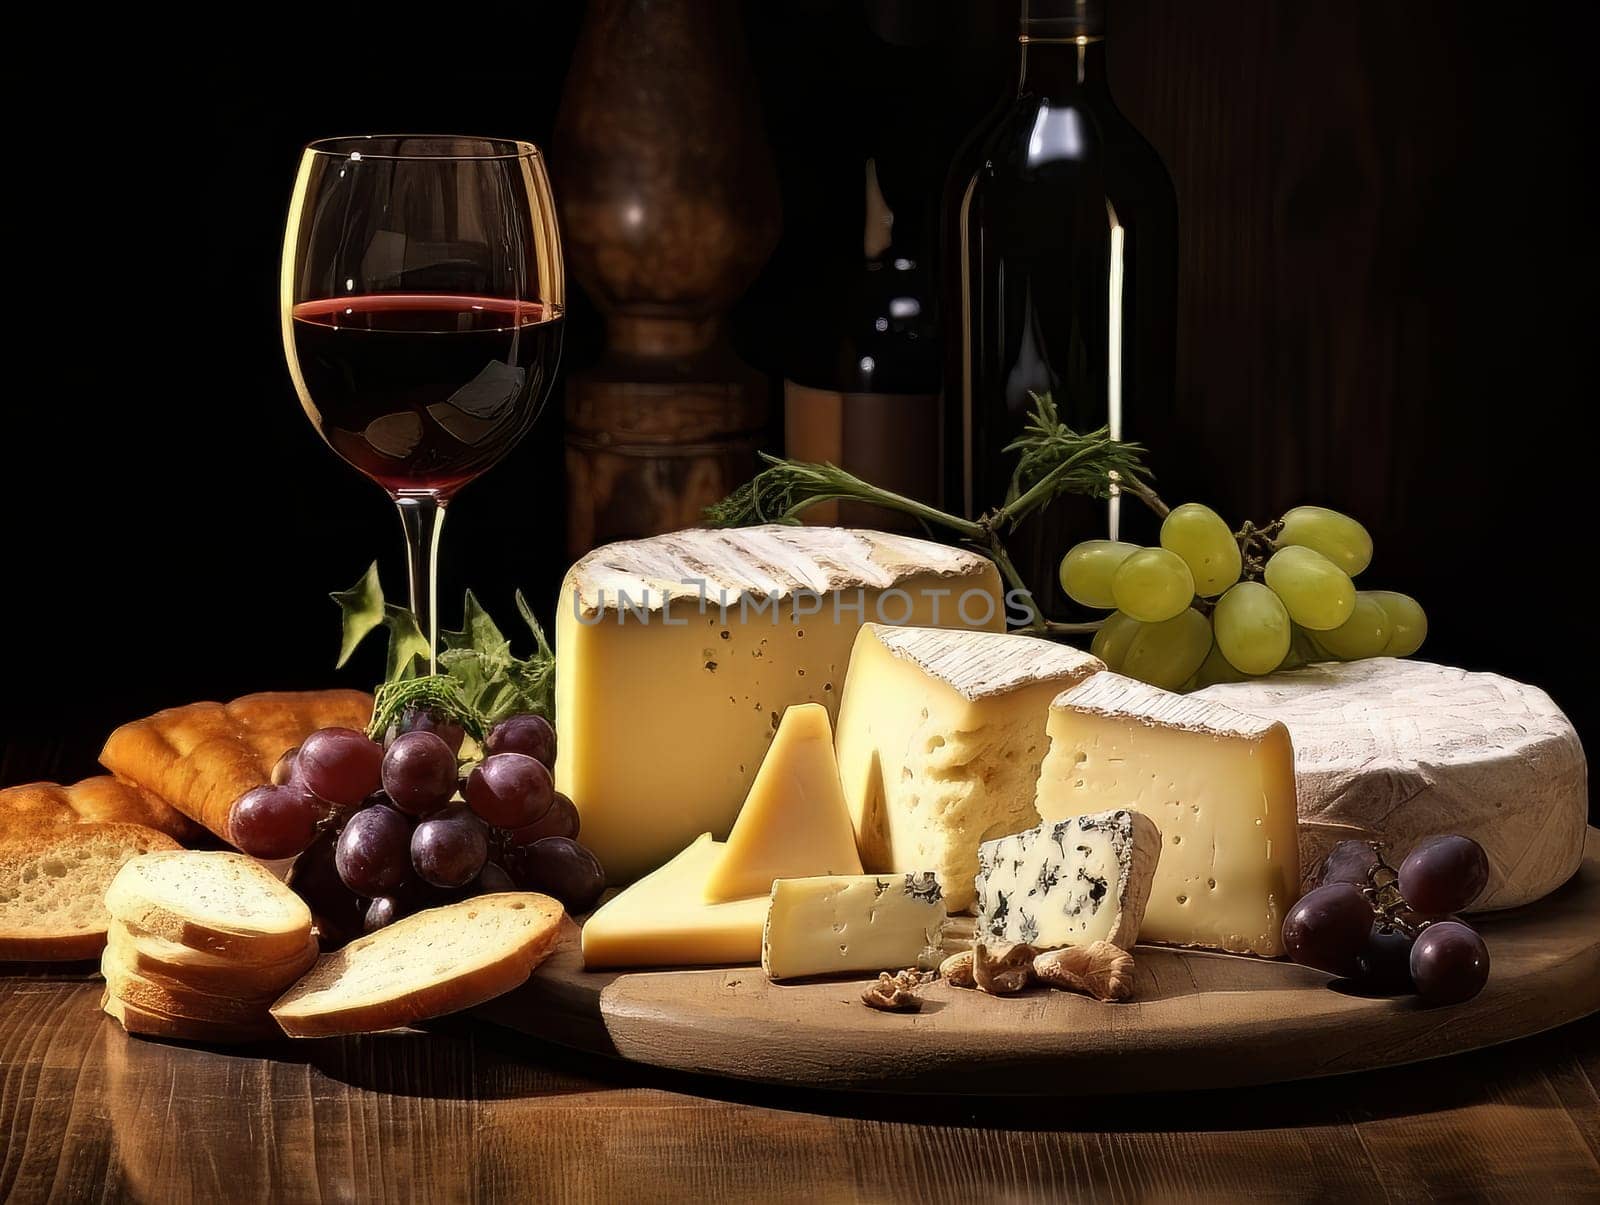 Board with cheeses, red wine in a glass and grapes. Still life of table for tasting cheese and wine, cozy romantic atmosphere, low key AI